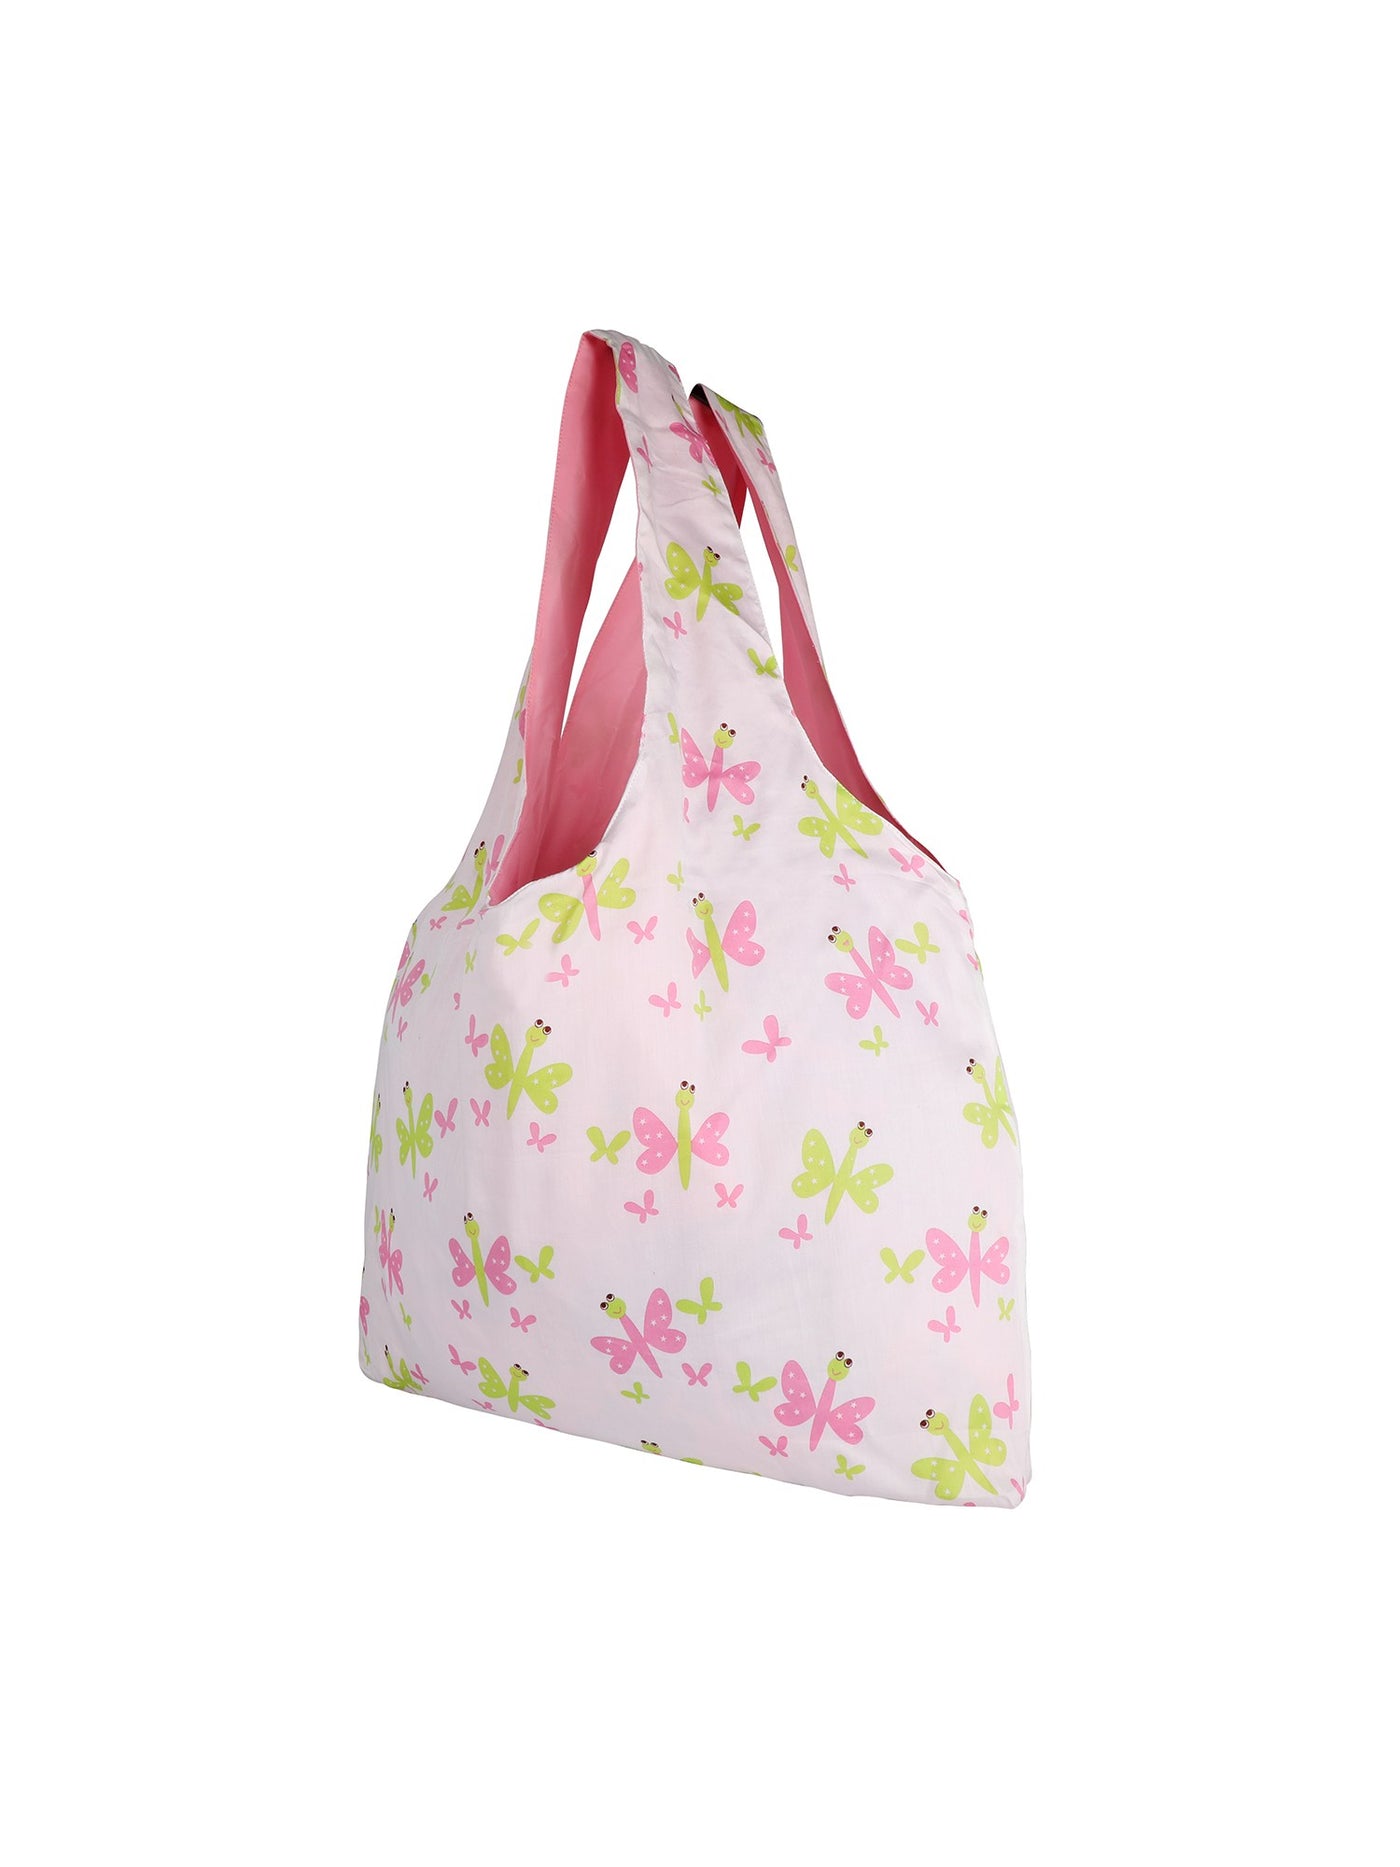 Butterfly (White) Tote Bag